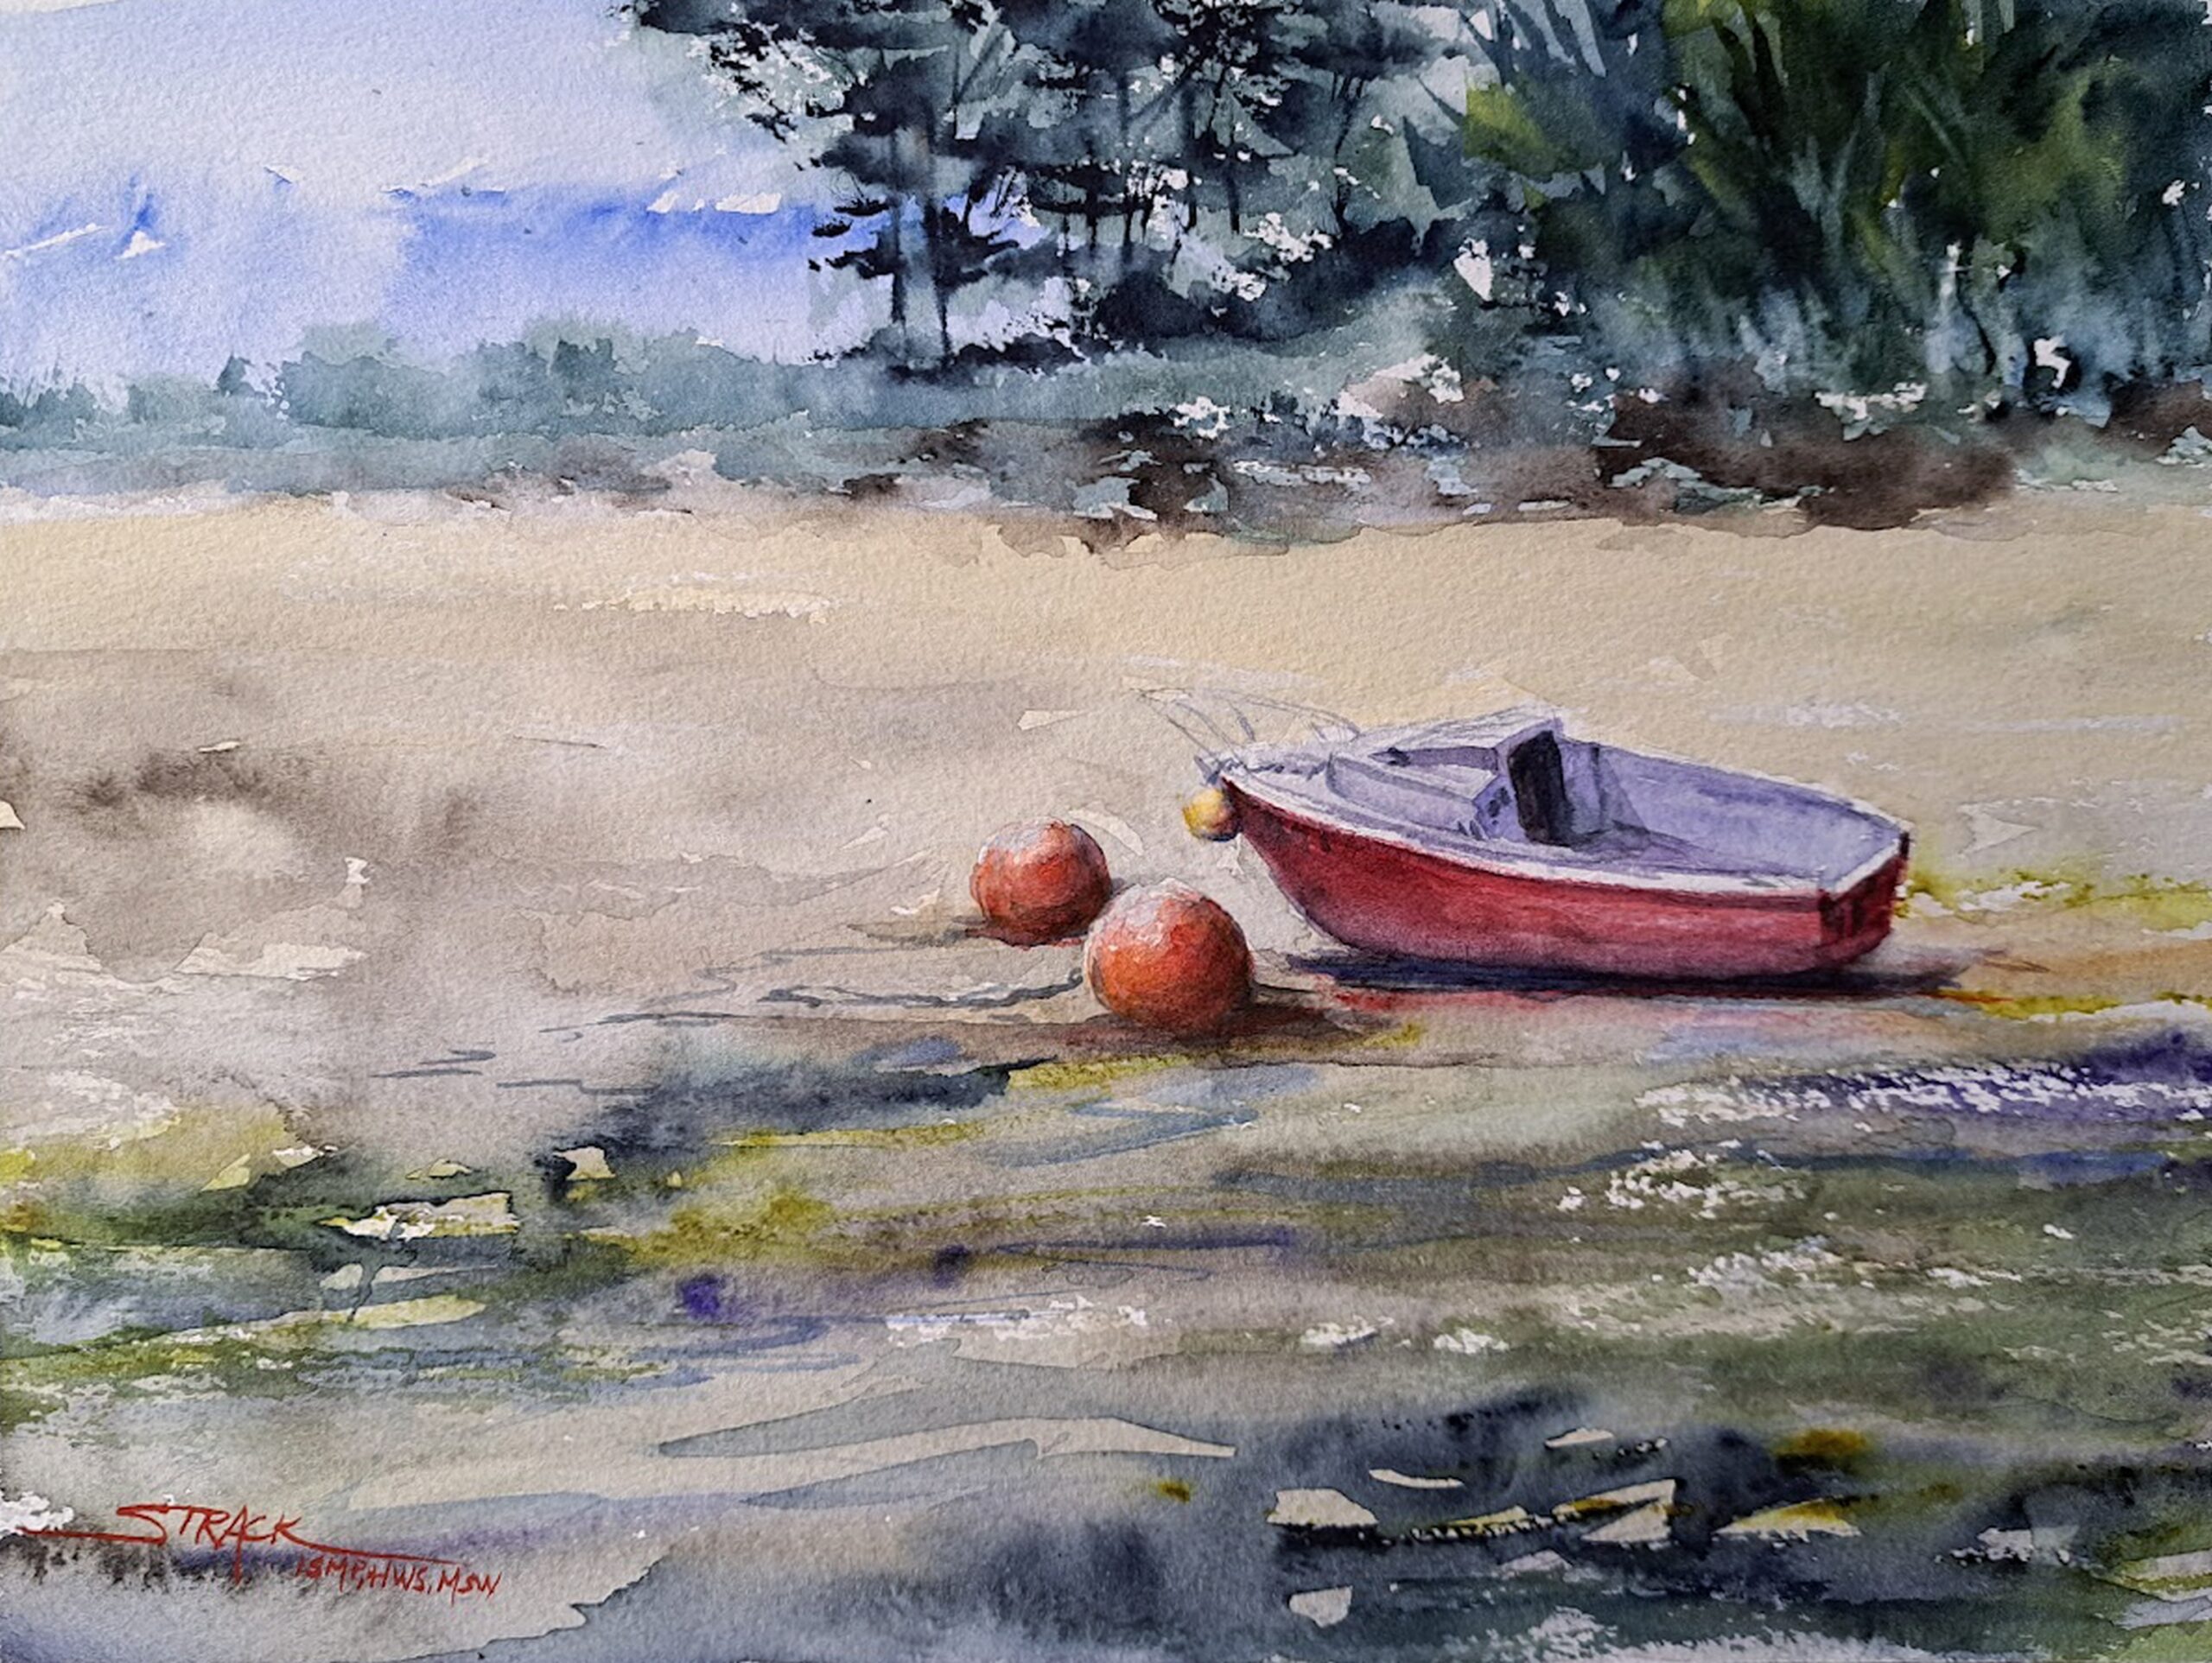 Annie Strack, “Low Tide, St Brieuc, France,” 2022, watercolor, 9 x 12 in., Available from artist, Plein air